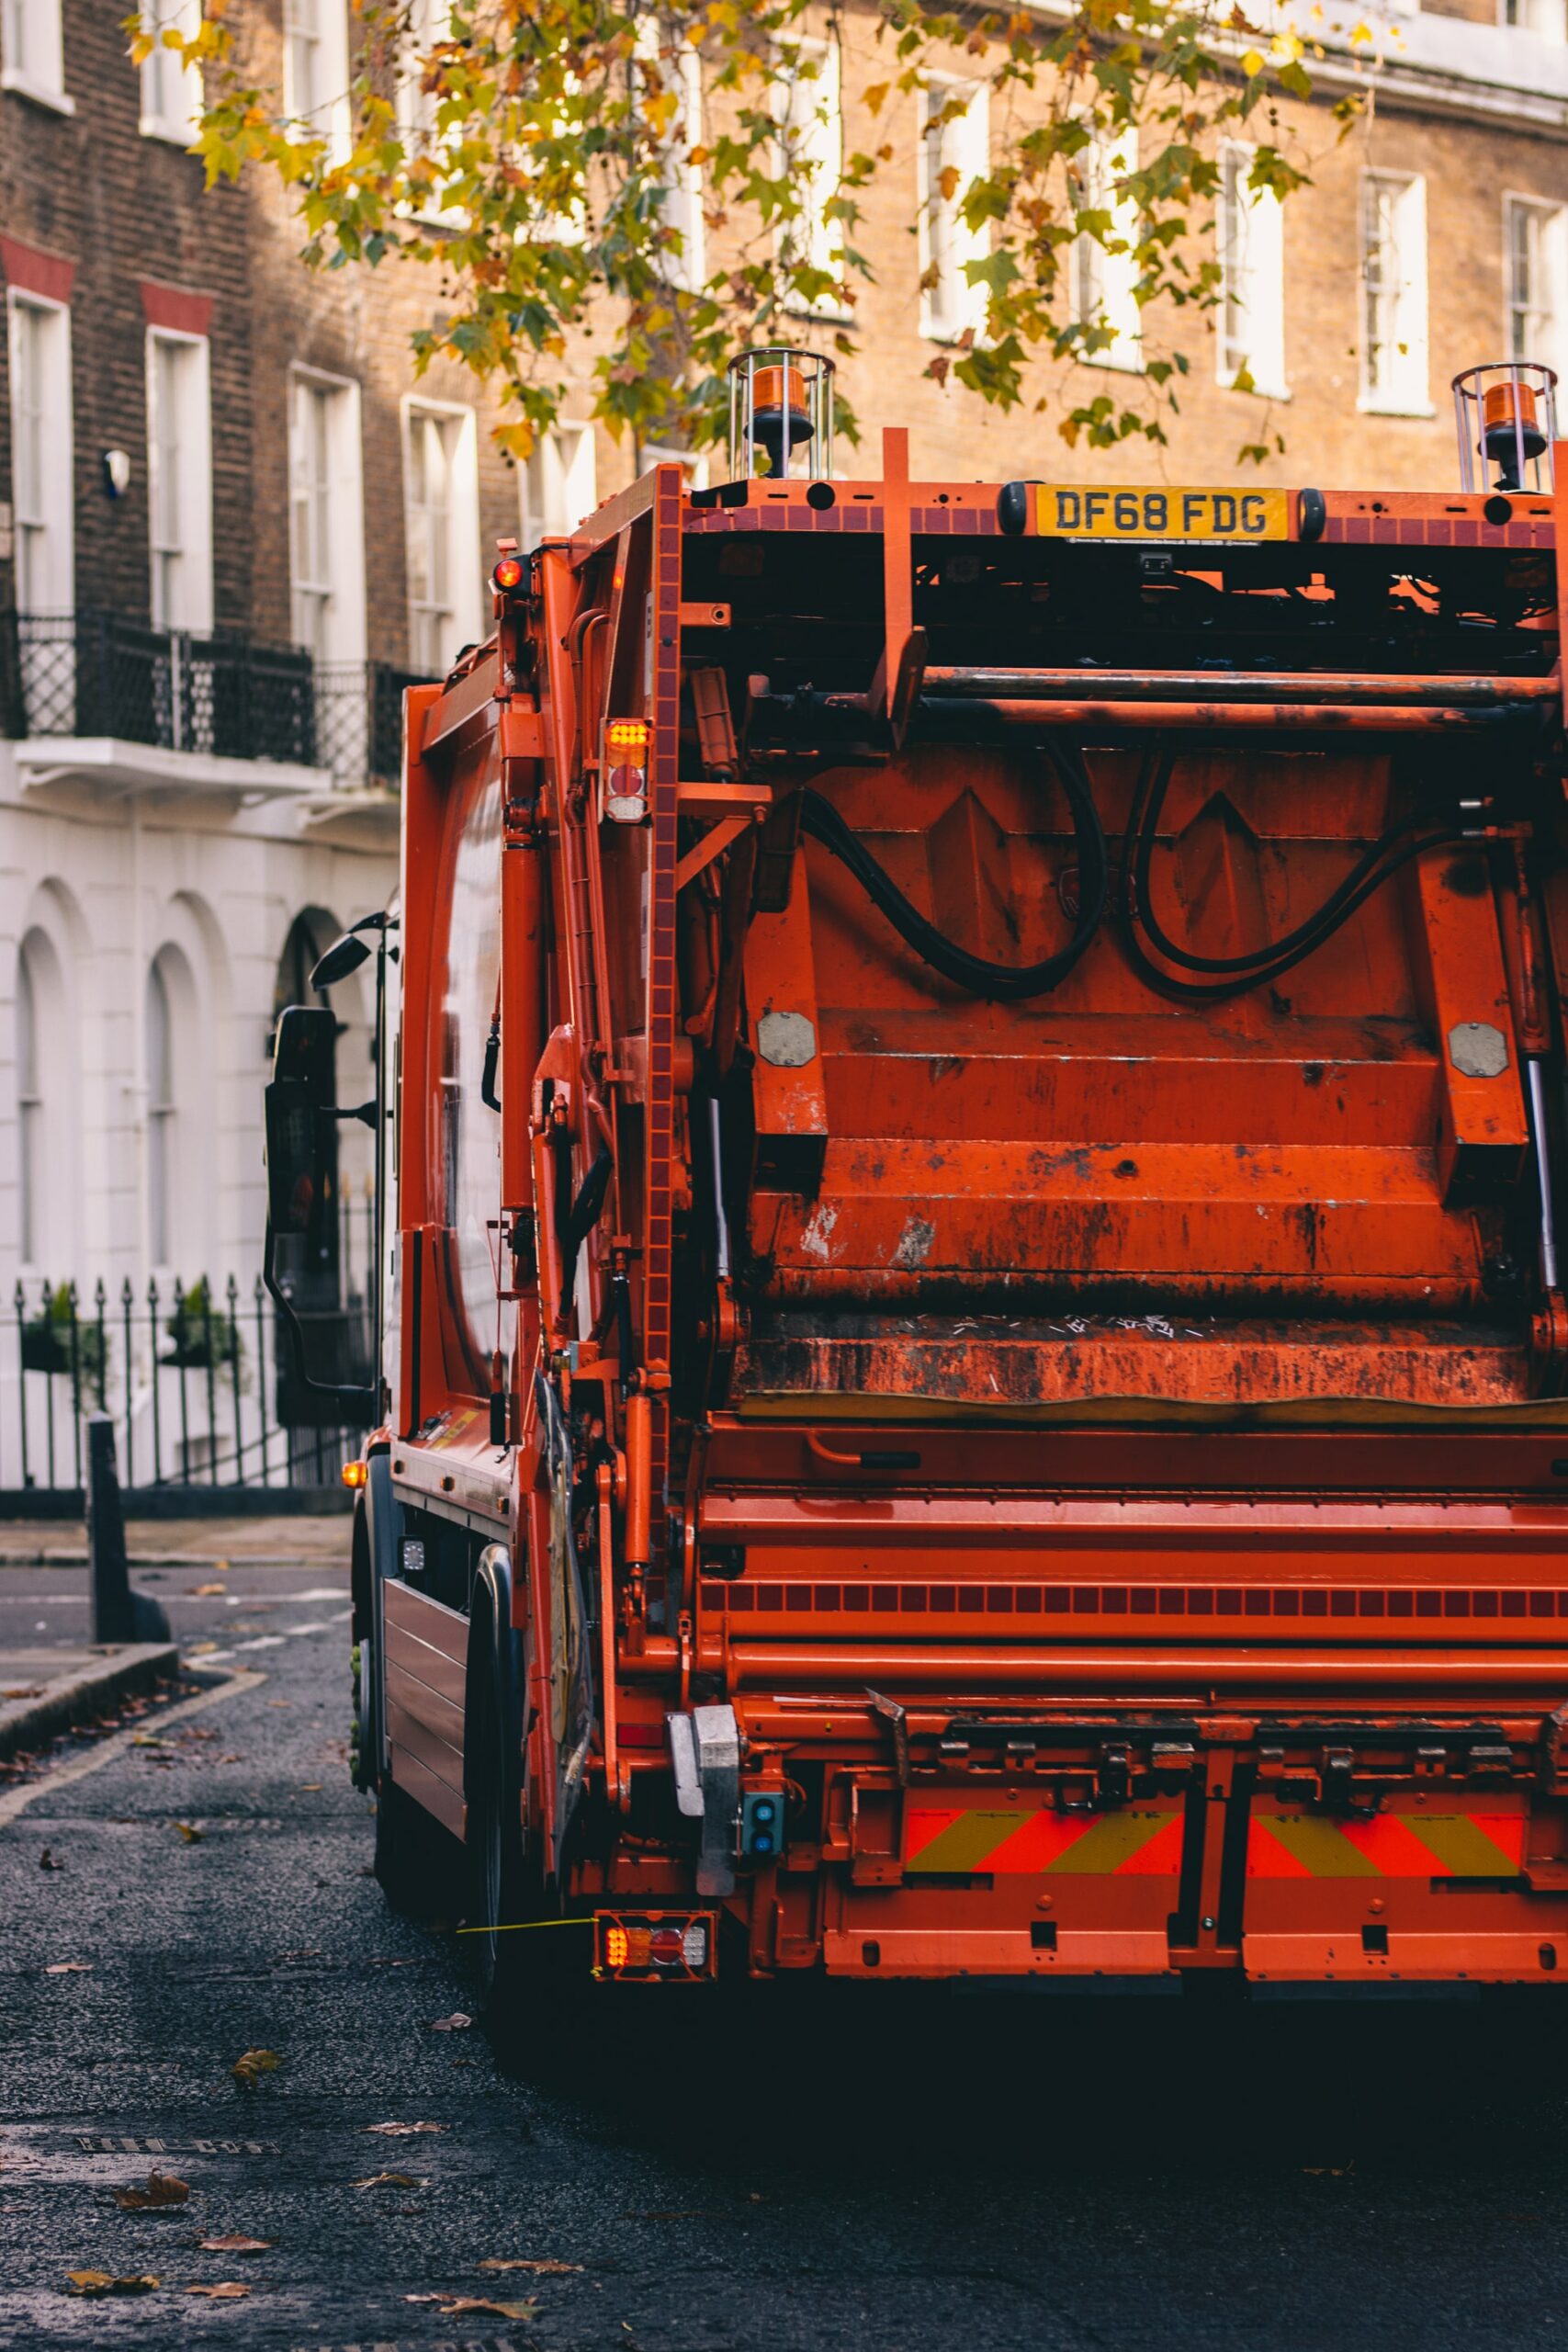 photograph of an orange rubbish collection truck